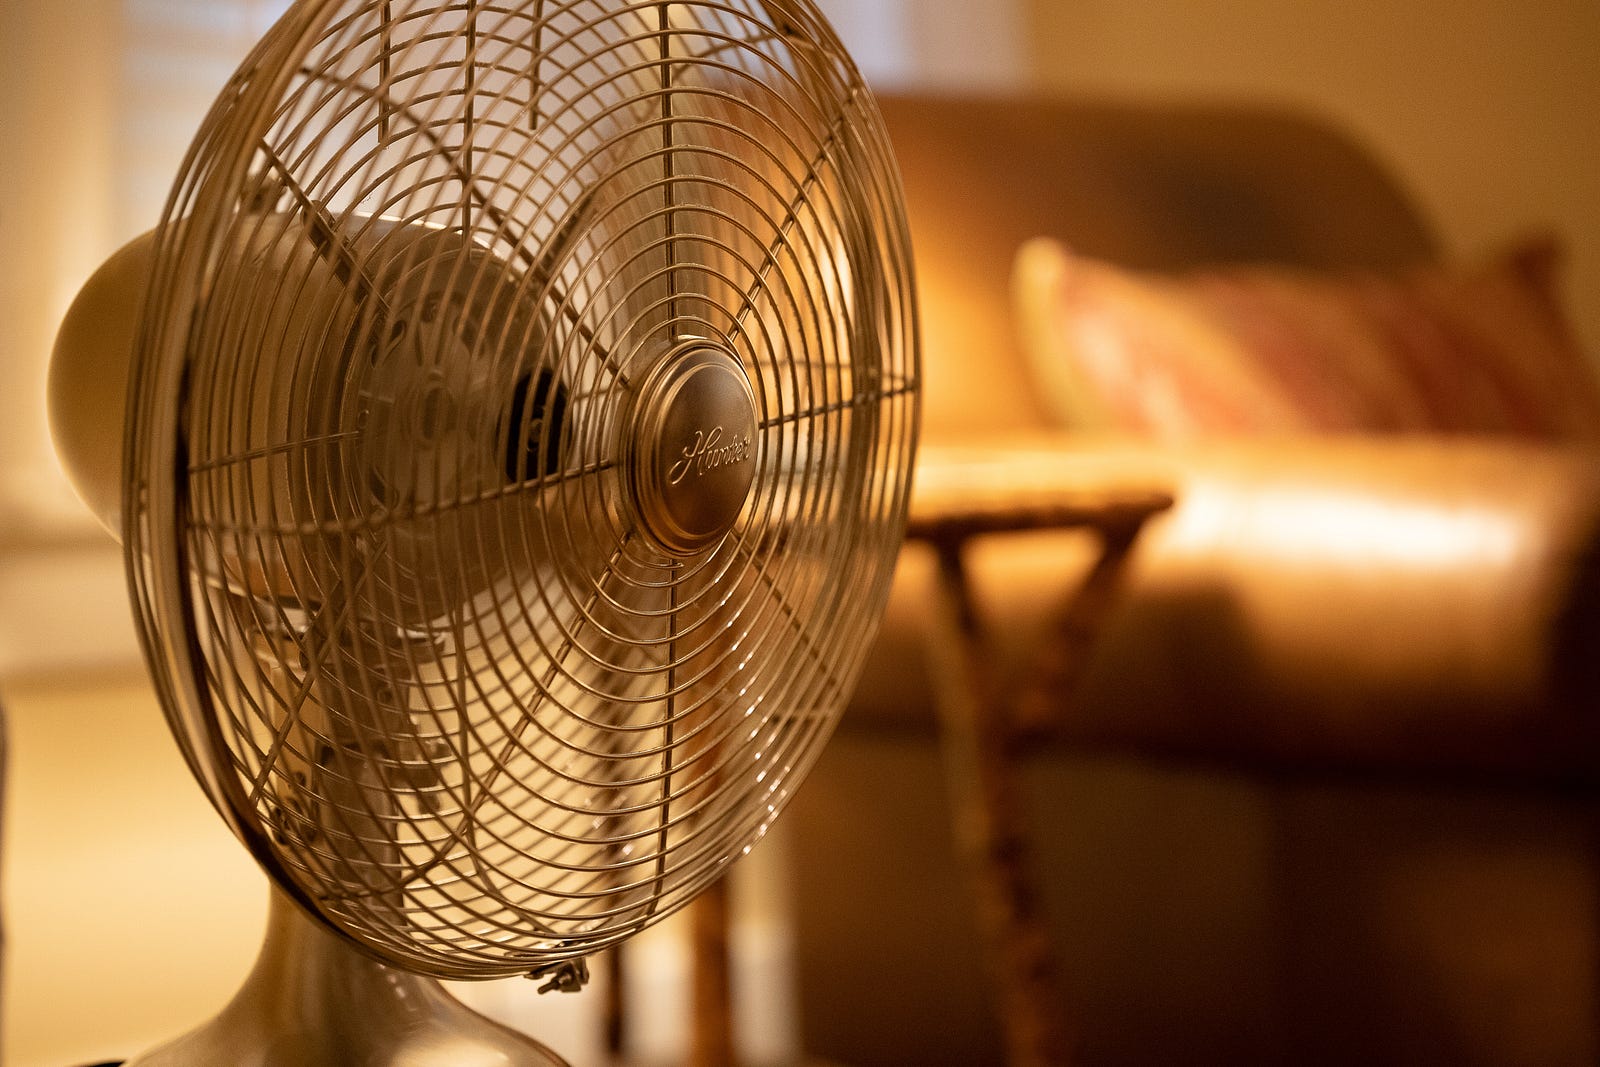 A sepia image of a fan in the foreground (with a brown sofa on the right side of the background). Using a fan or air conditioner in your bedroom can create a cool and comfortable environment for sleeping. These appliances help circulate air and lower the ambient temperature, promoting better sleep quality.